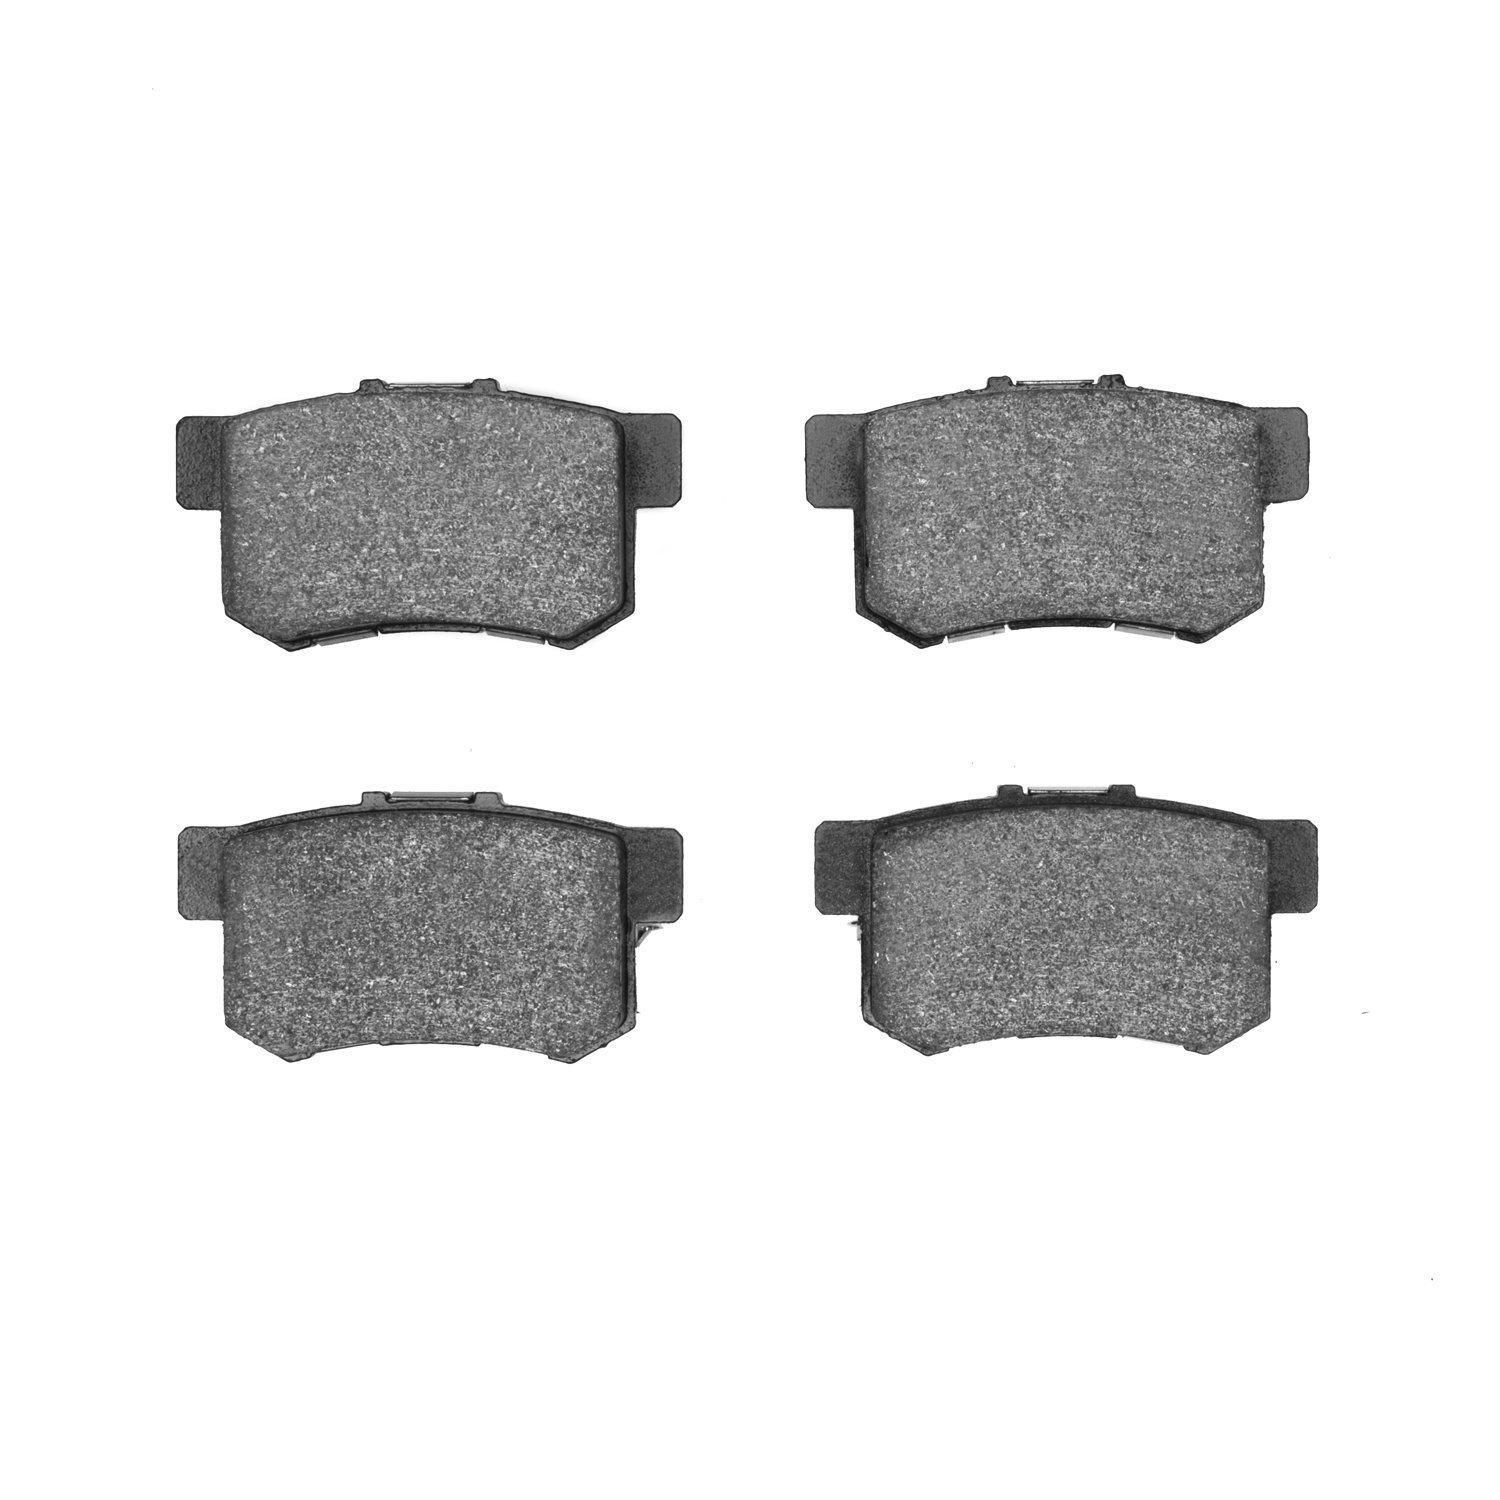 1115-0537-00 Active Performance Low-Metallic Brake Pads, Fits Select Multiple Makes/Models, Position: Rear